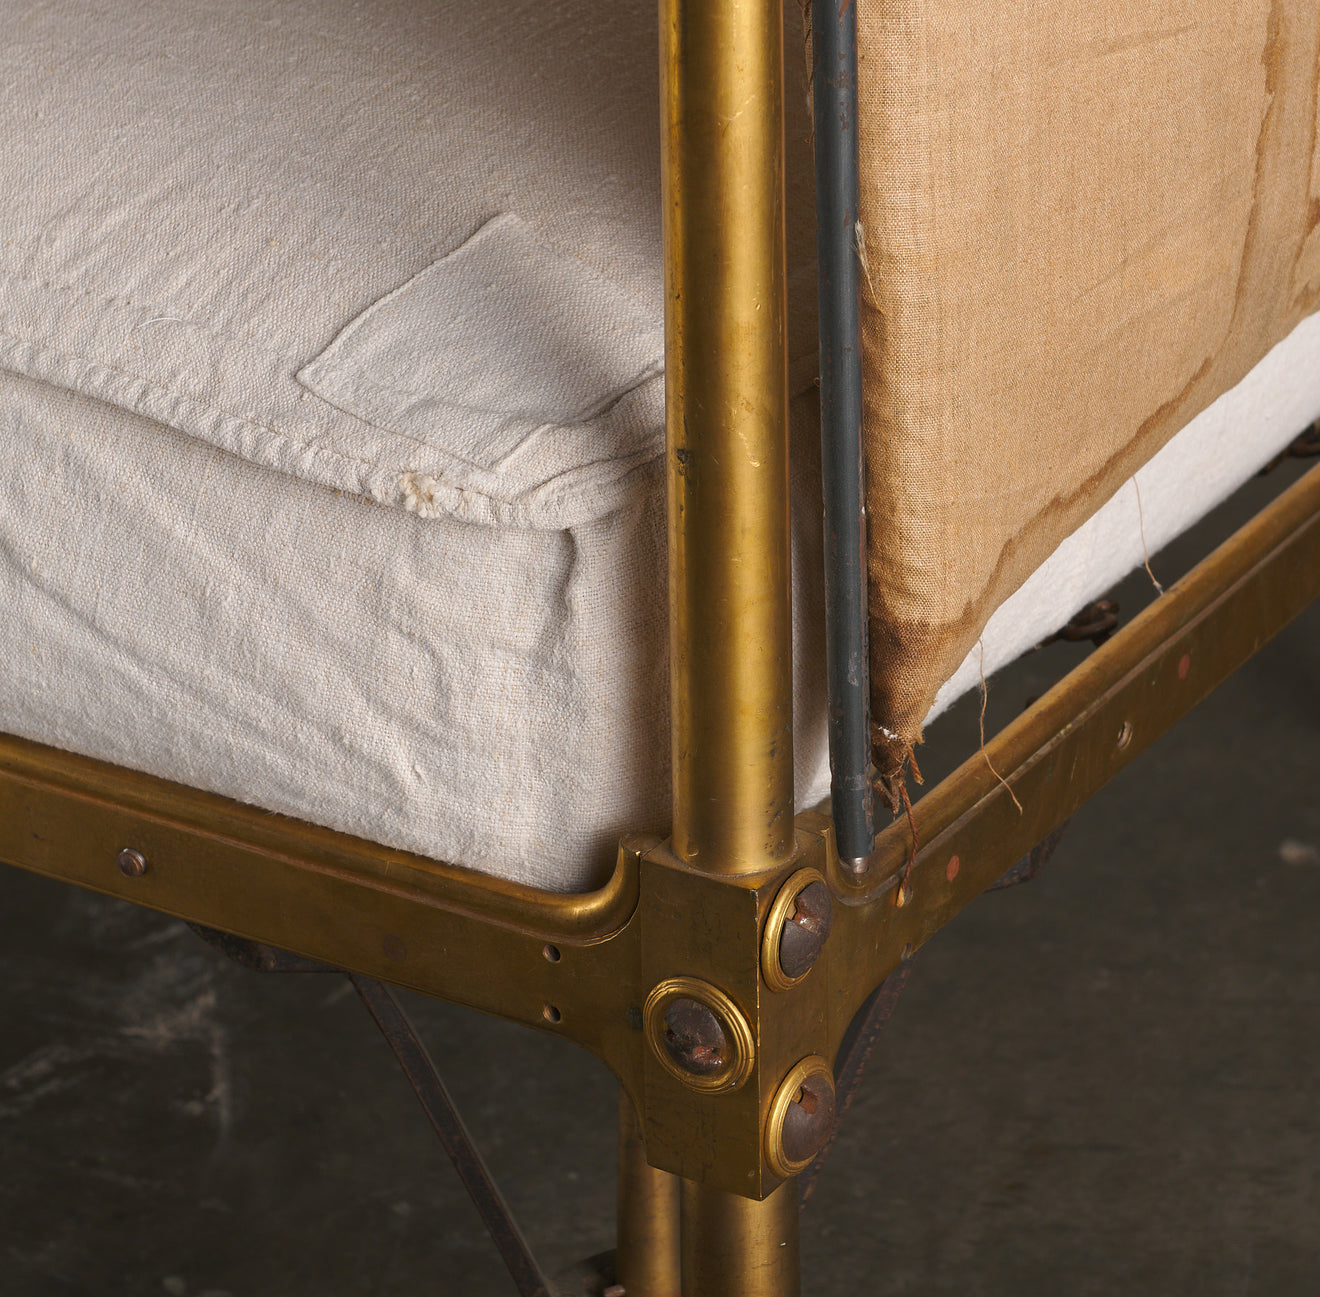 EMPIRE FOLDING LIT DE CAMP BED WITH CANOPY, POSSIBLY BY MARIE-JEAN DESOUCHES (1764-1828)